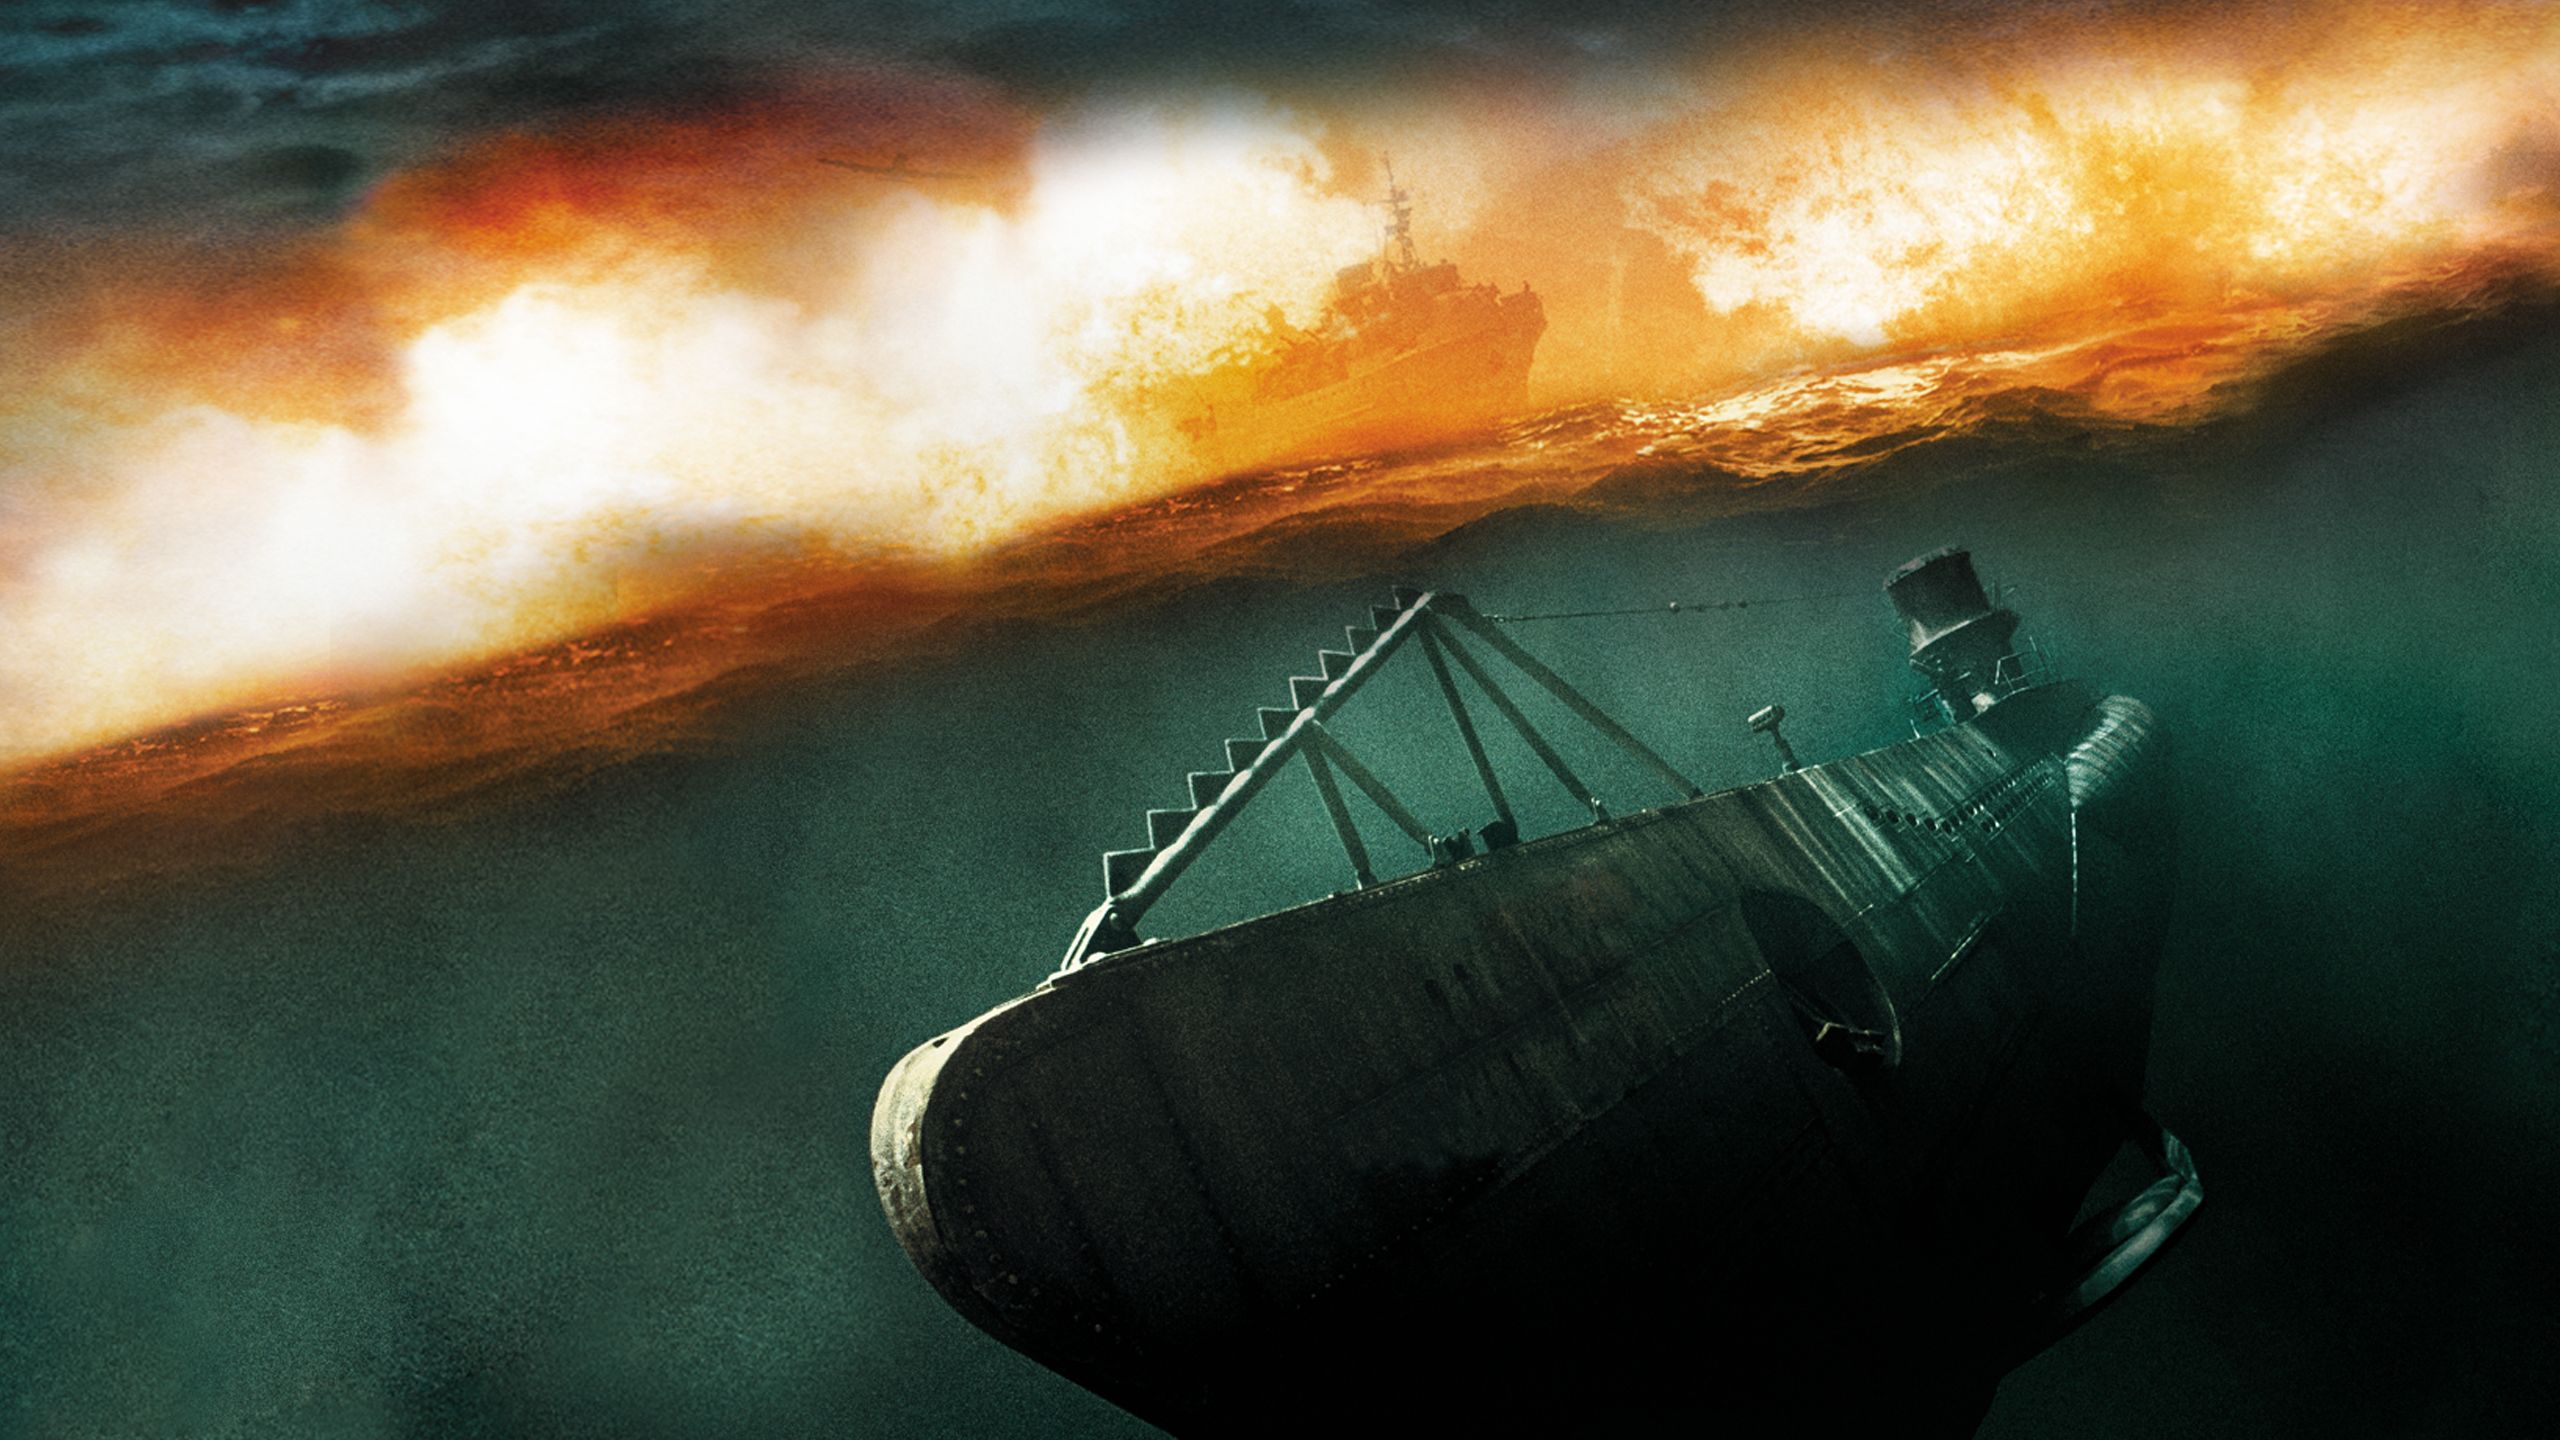 a submarine in troubled waters documentary torrent